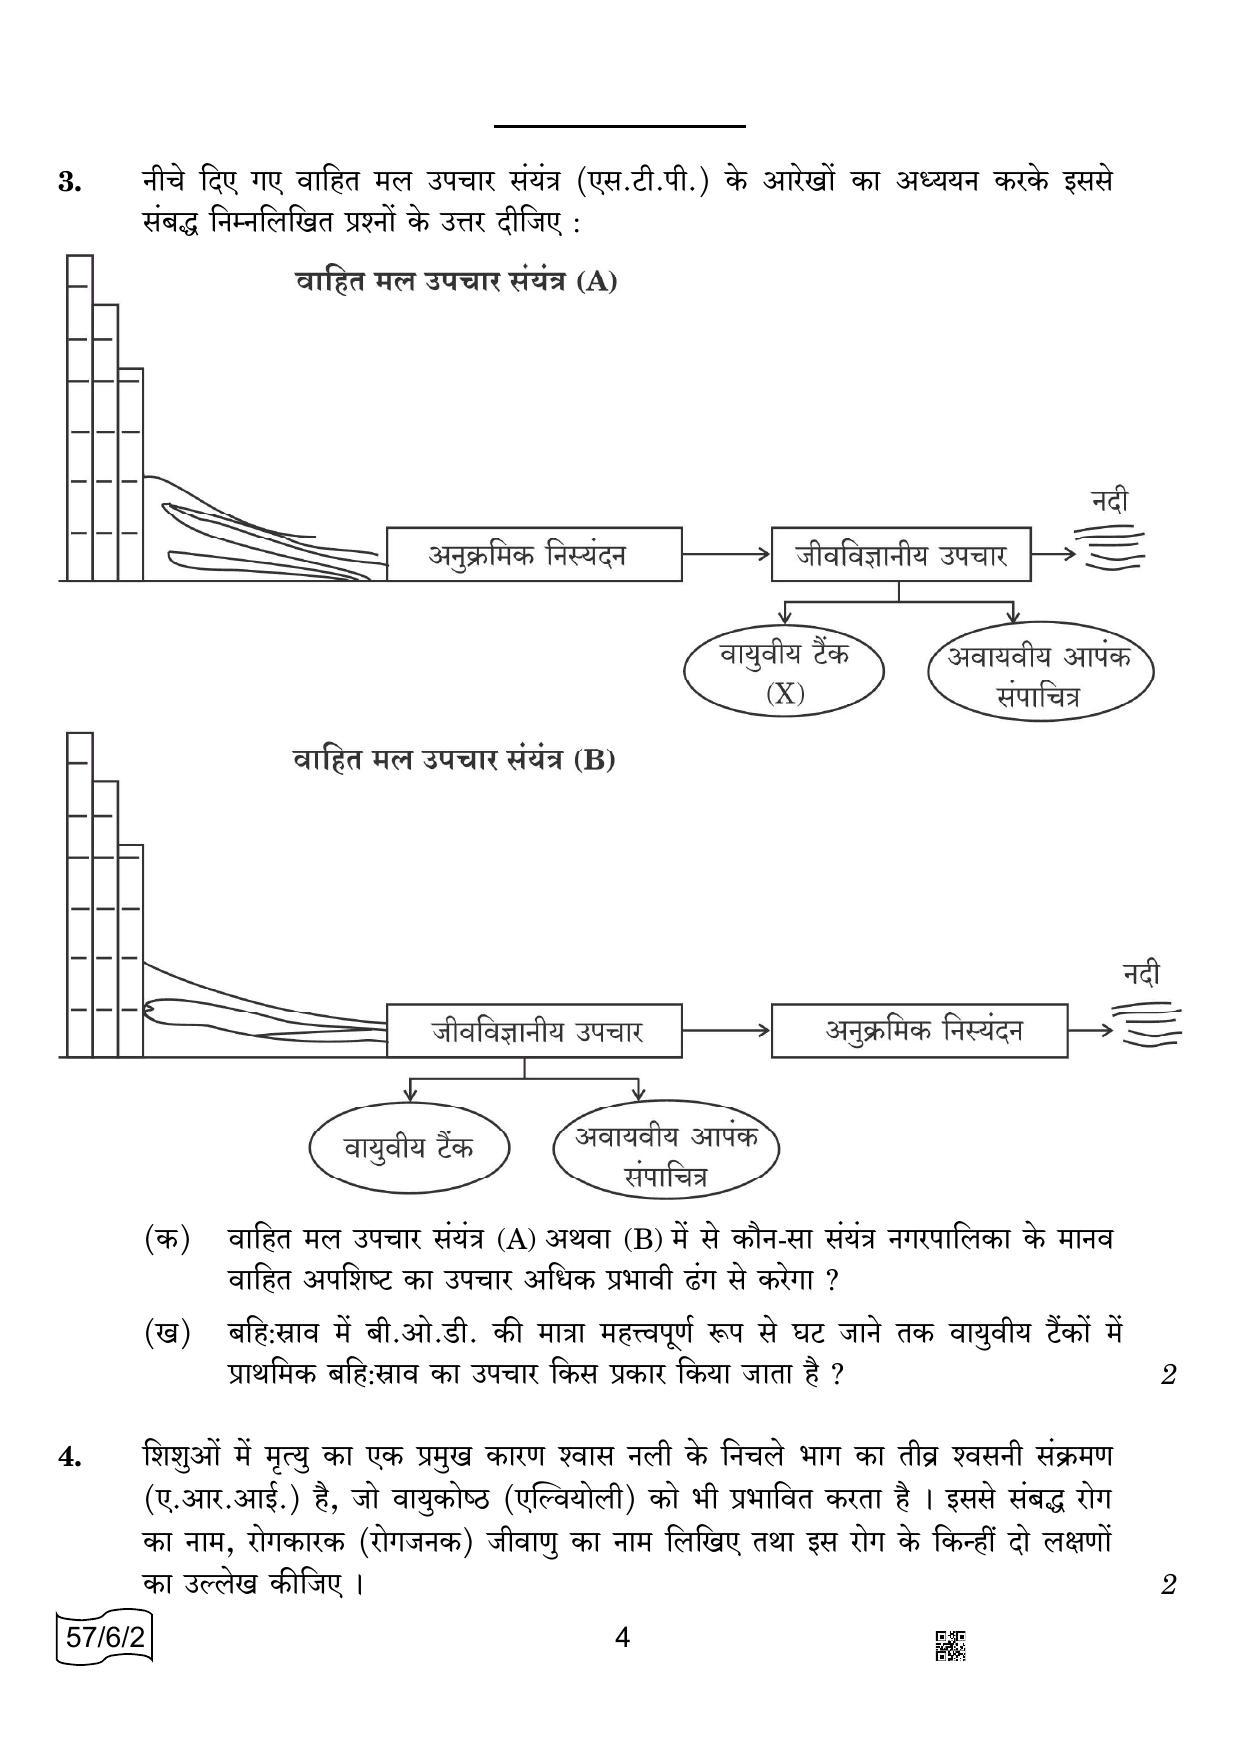 CBSE Class 12 57-6-2 BIOLOGY 2022 Compartment Question Paper - Page 4